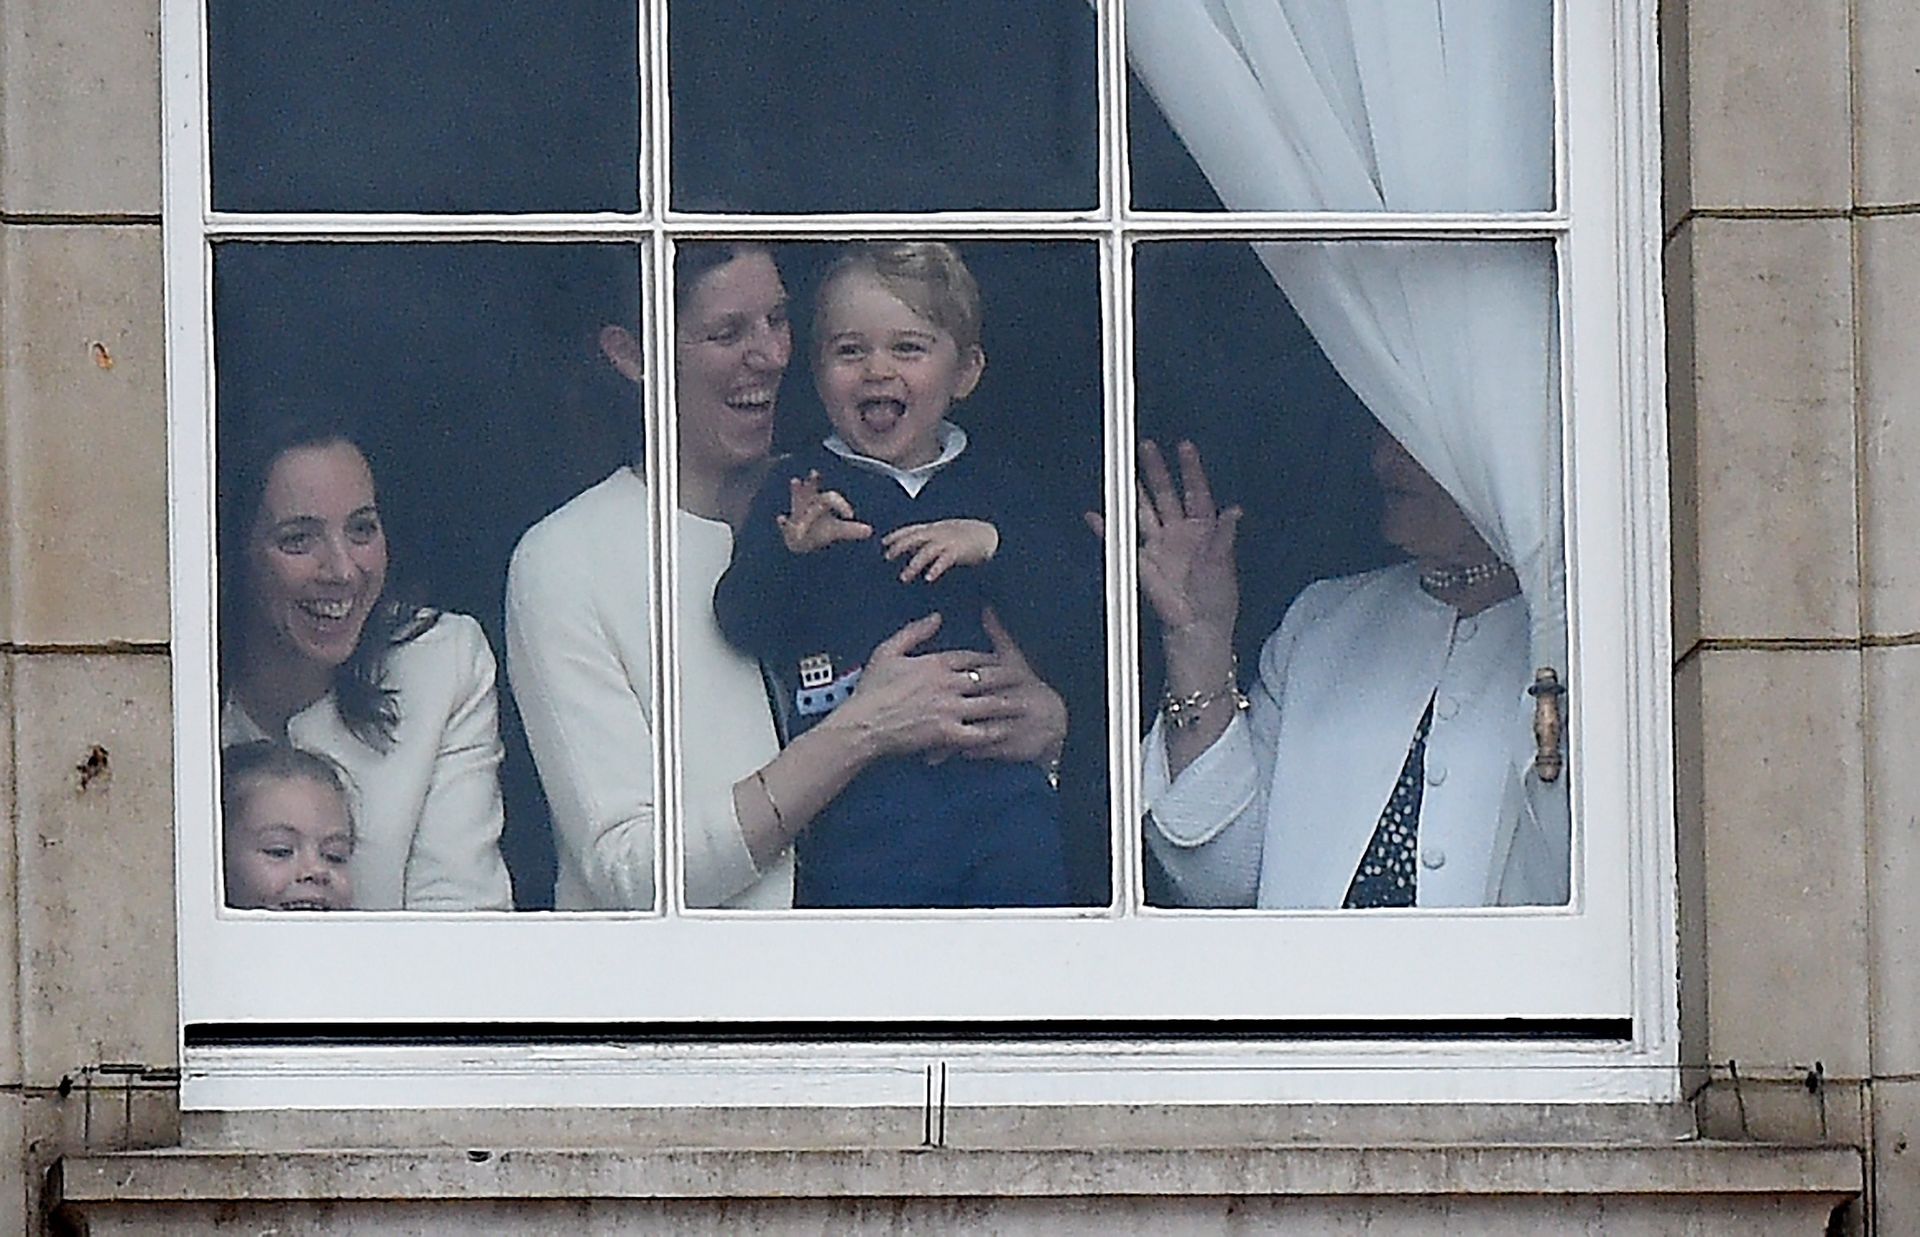 George trooping the colour